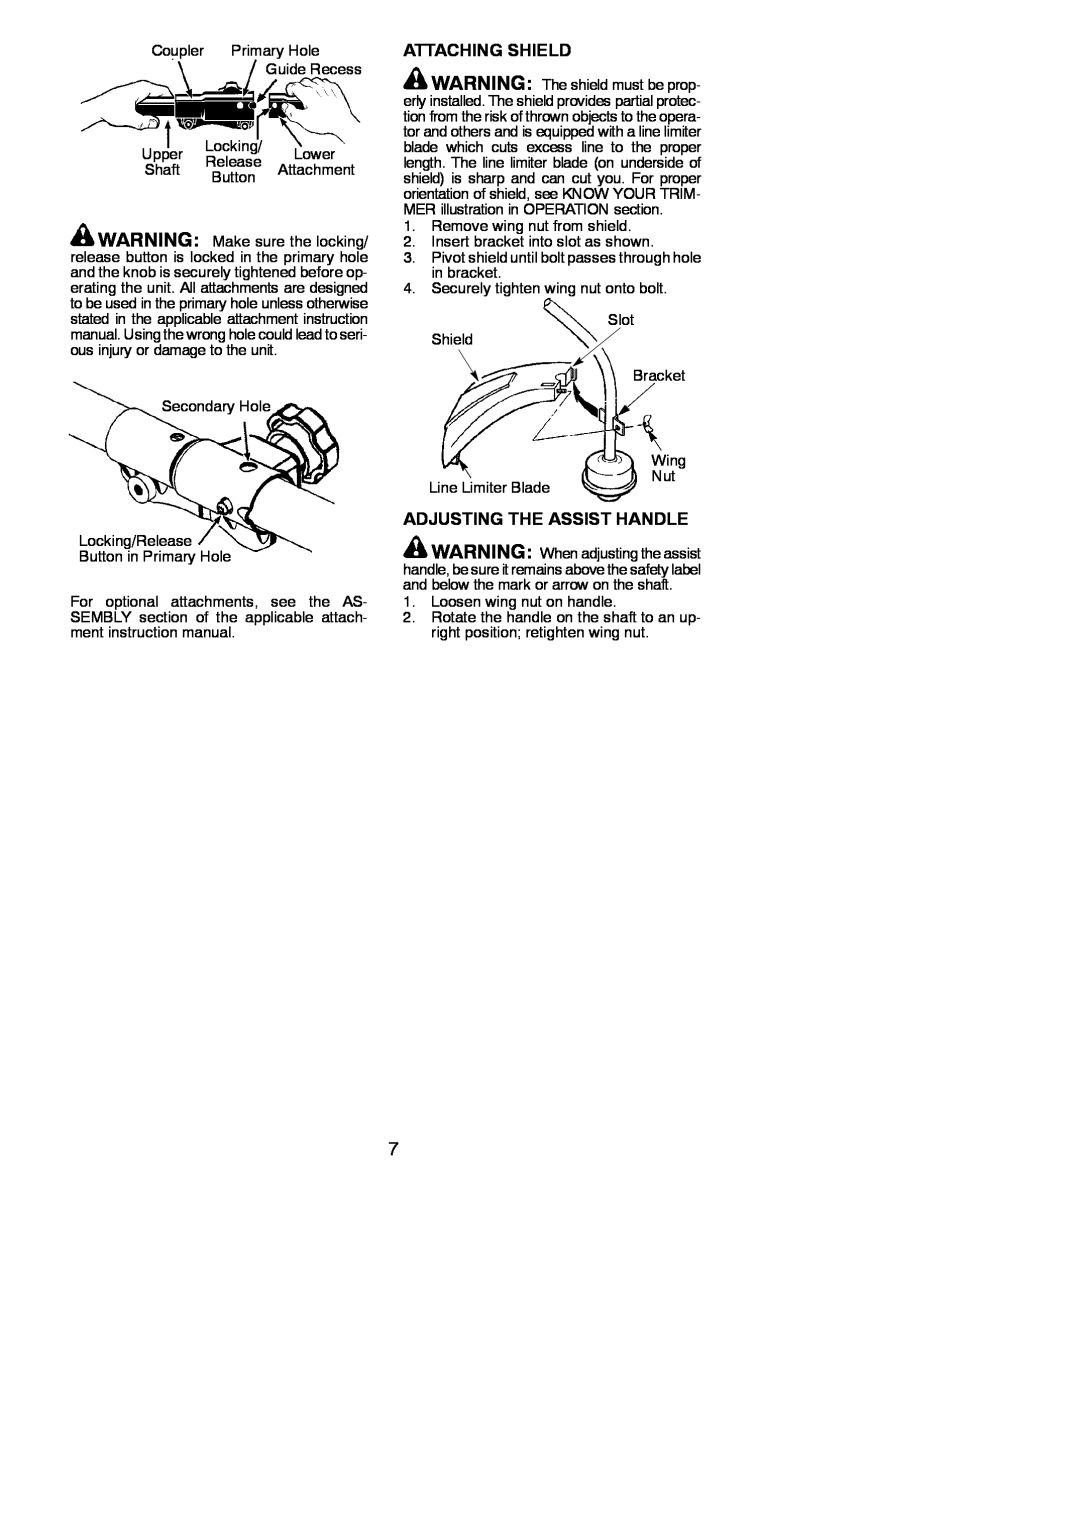 Poulan 545137276 instruction manual Attaching Shield, Adjusting The Assist Handle 